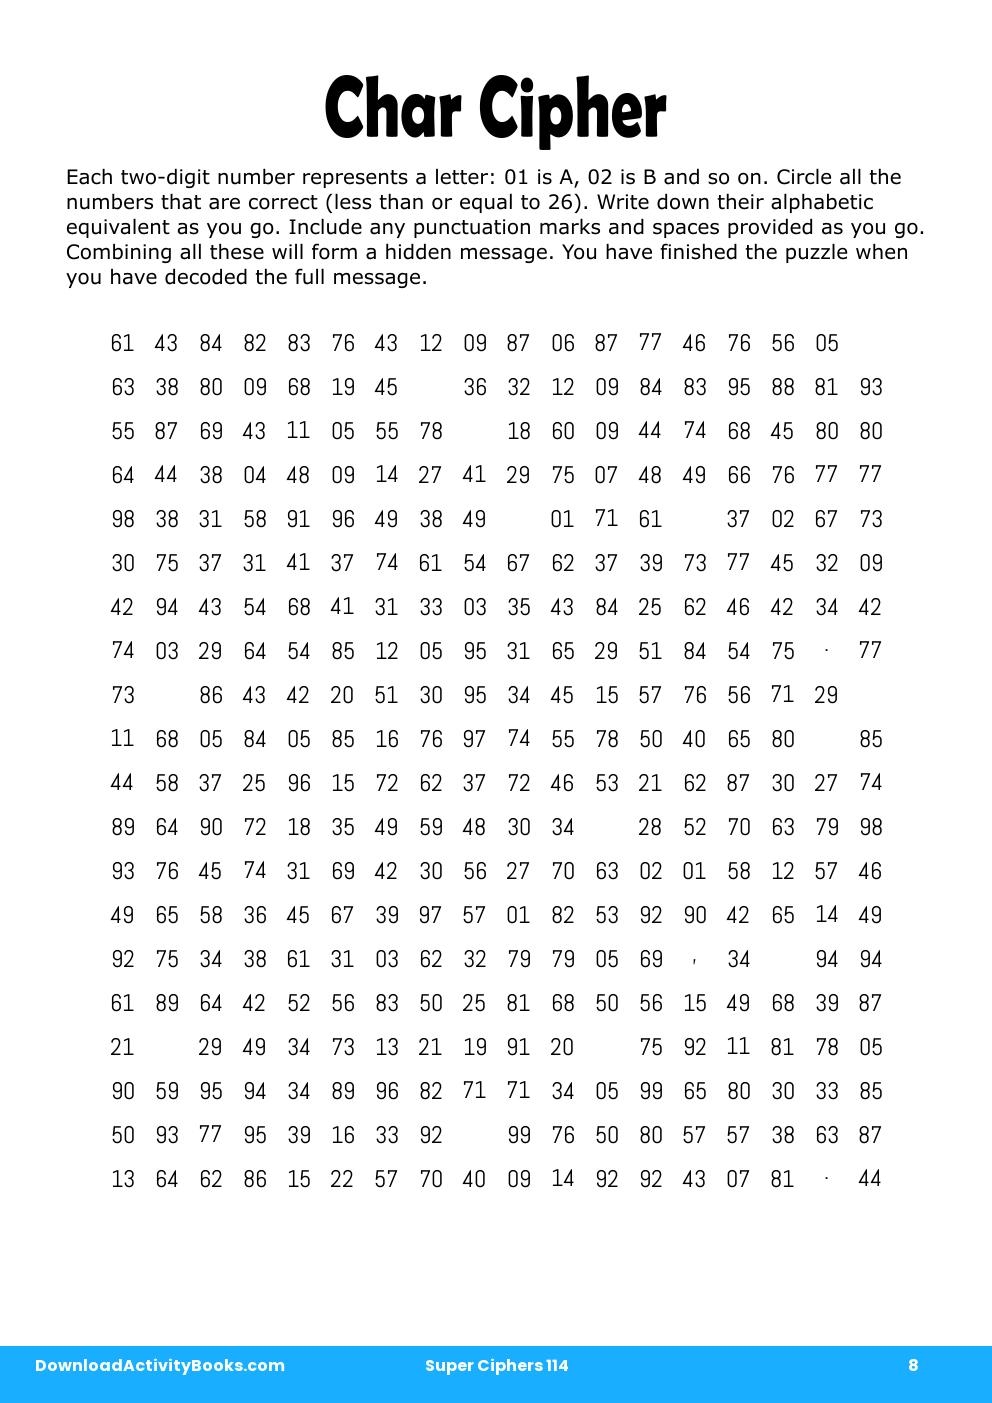 Char Cipher in Super Ciphers 114